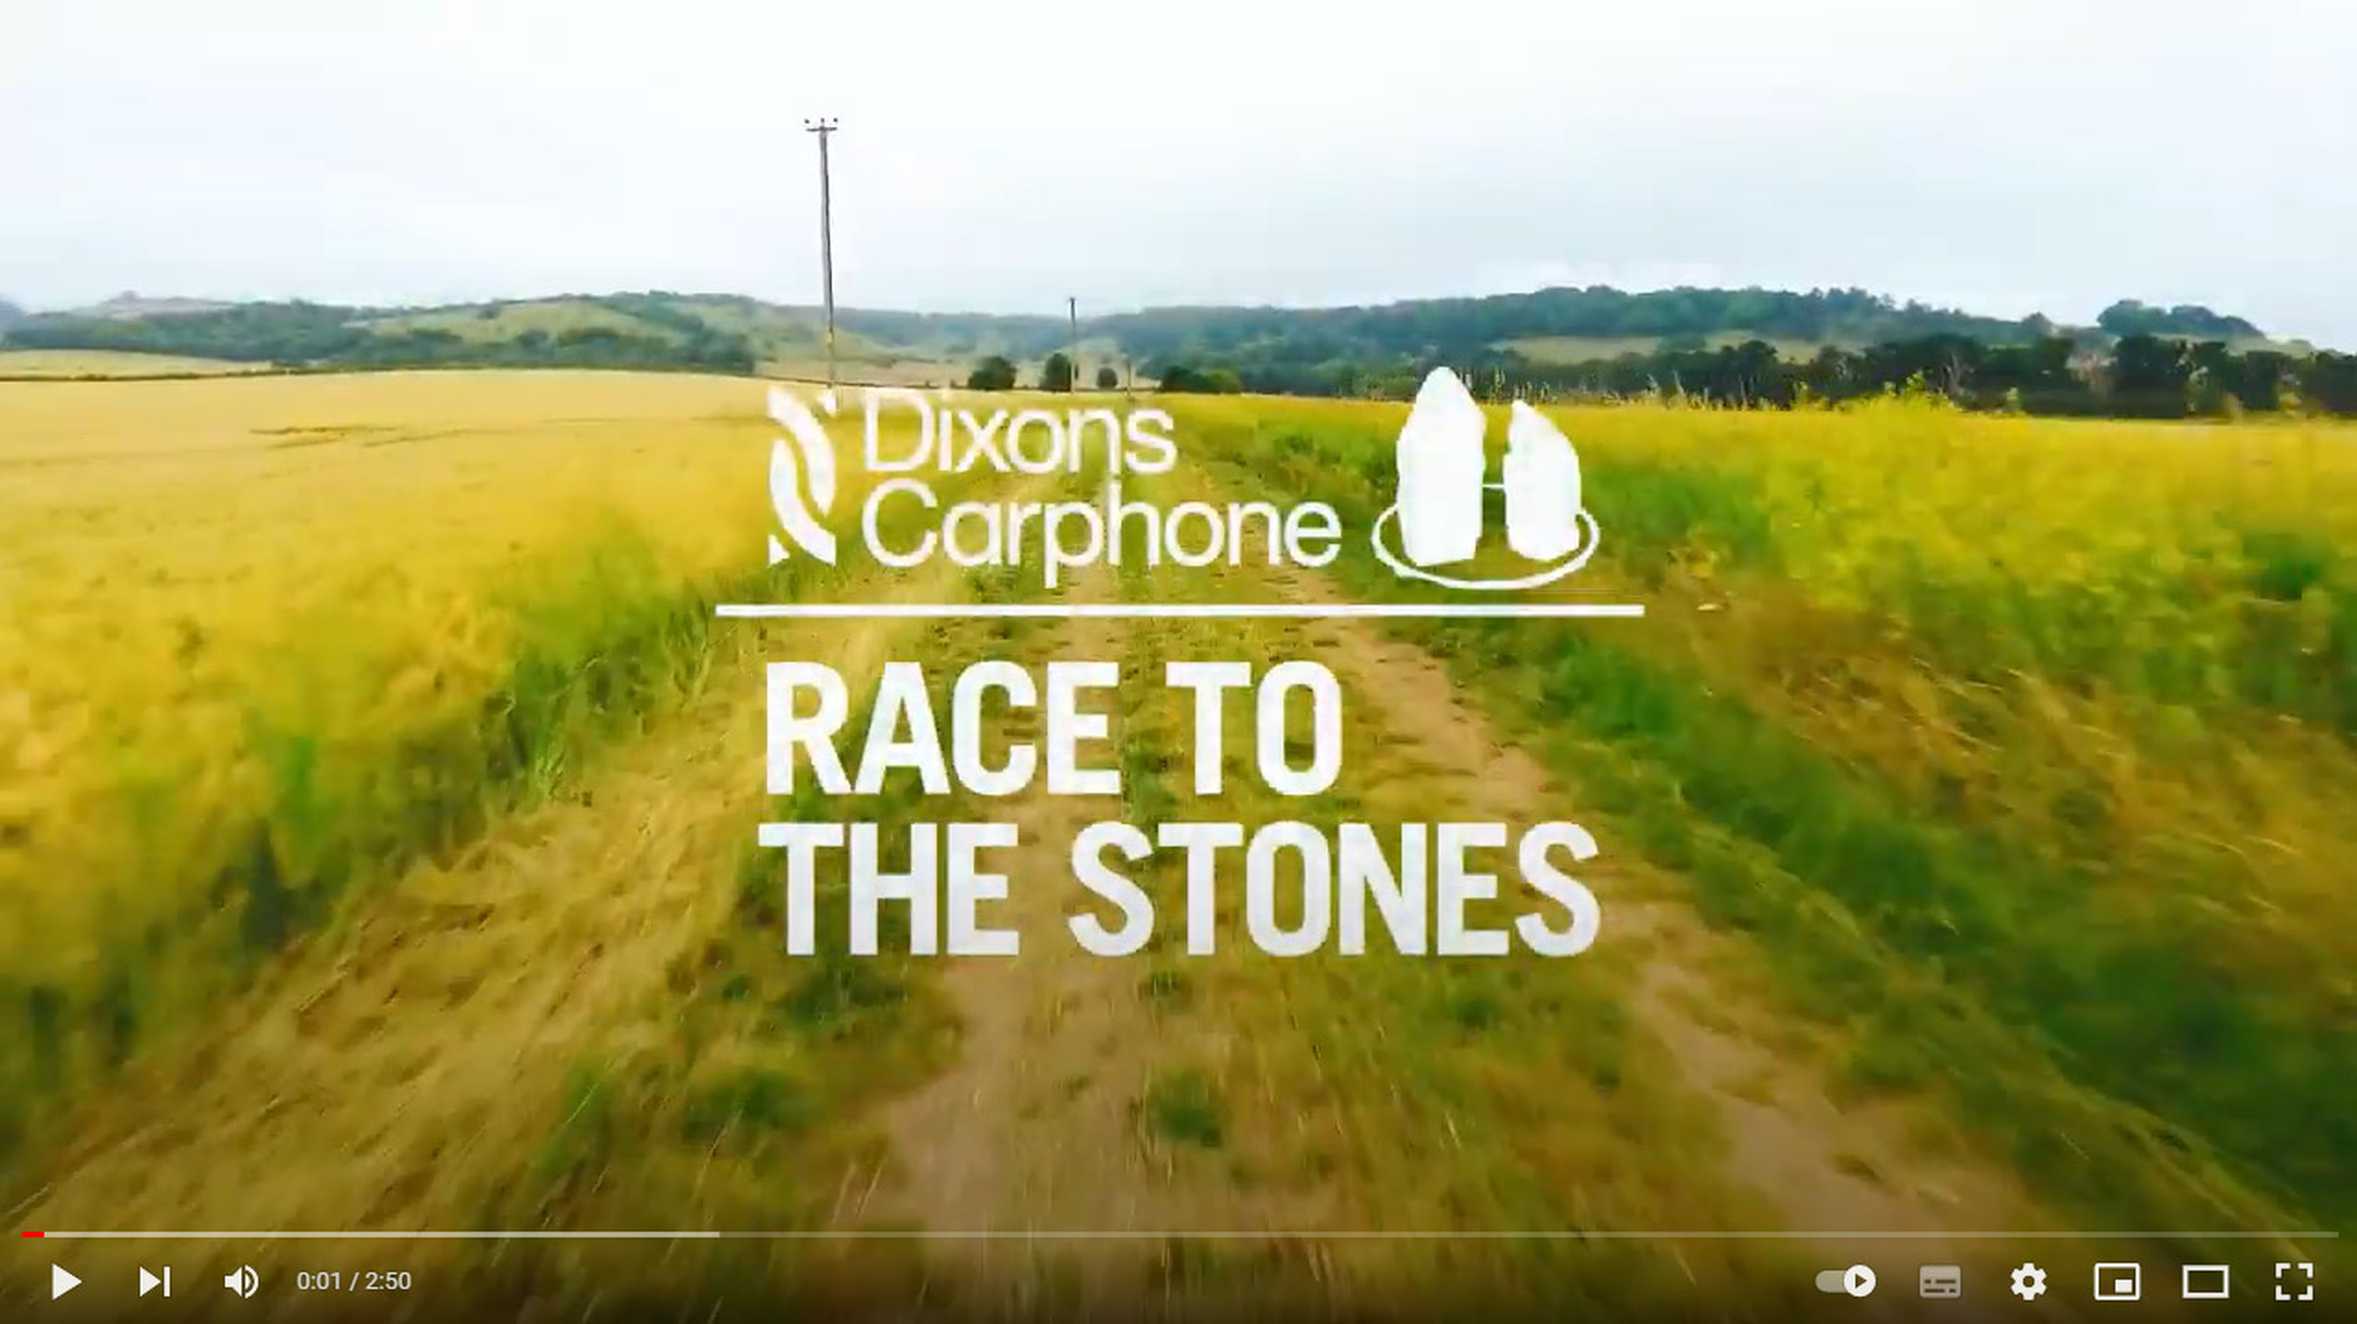 An opening card for a Race to the Stones video, with the Race to the Stones logo overlaid onto an image of a track through a field.